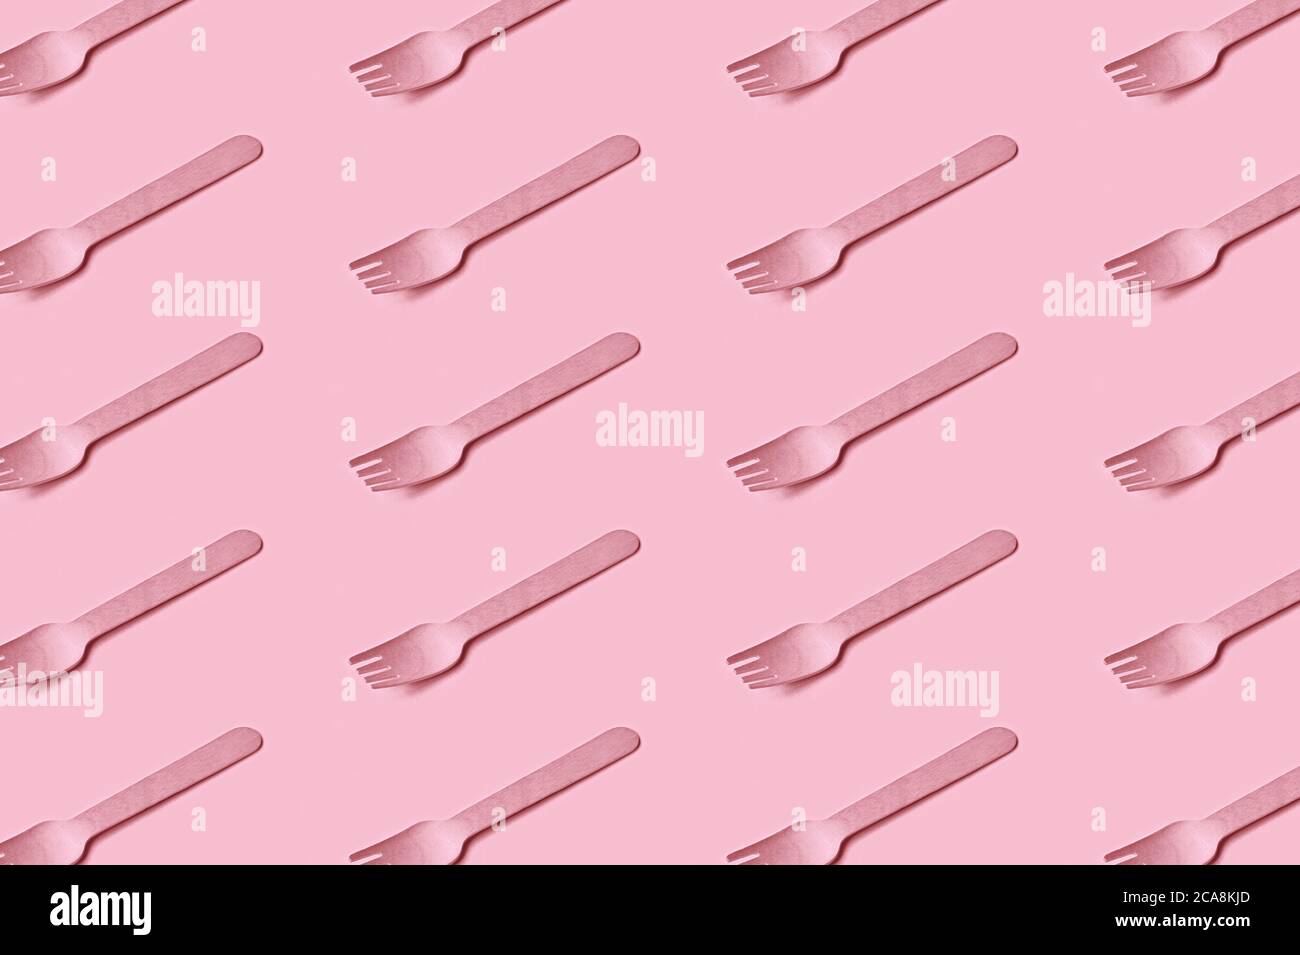 Plastic-free, zero waste, eco friendly disposable cutlery made of wood. Wooden fork flat lay, seamless pattern. Modern stylish design in trendy pink. Stock Photo